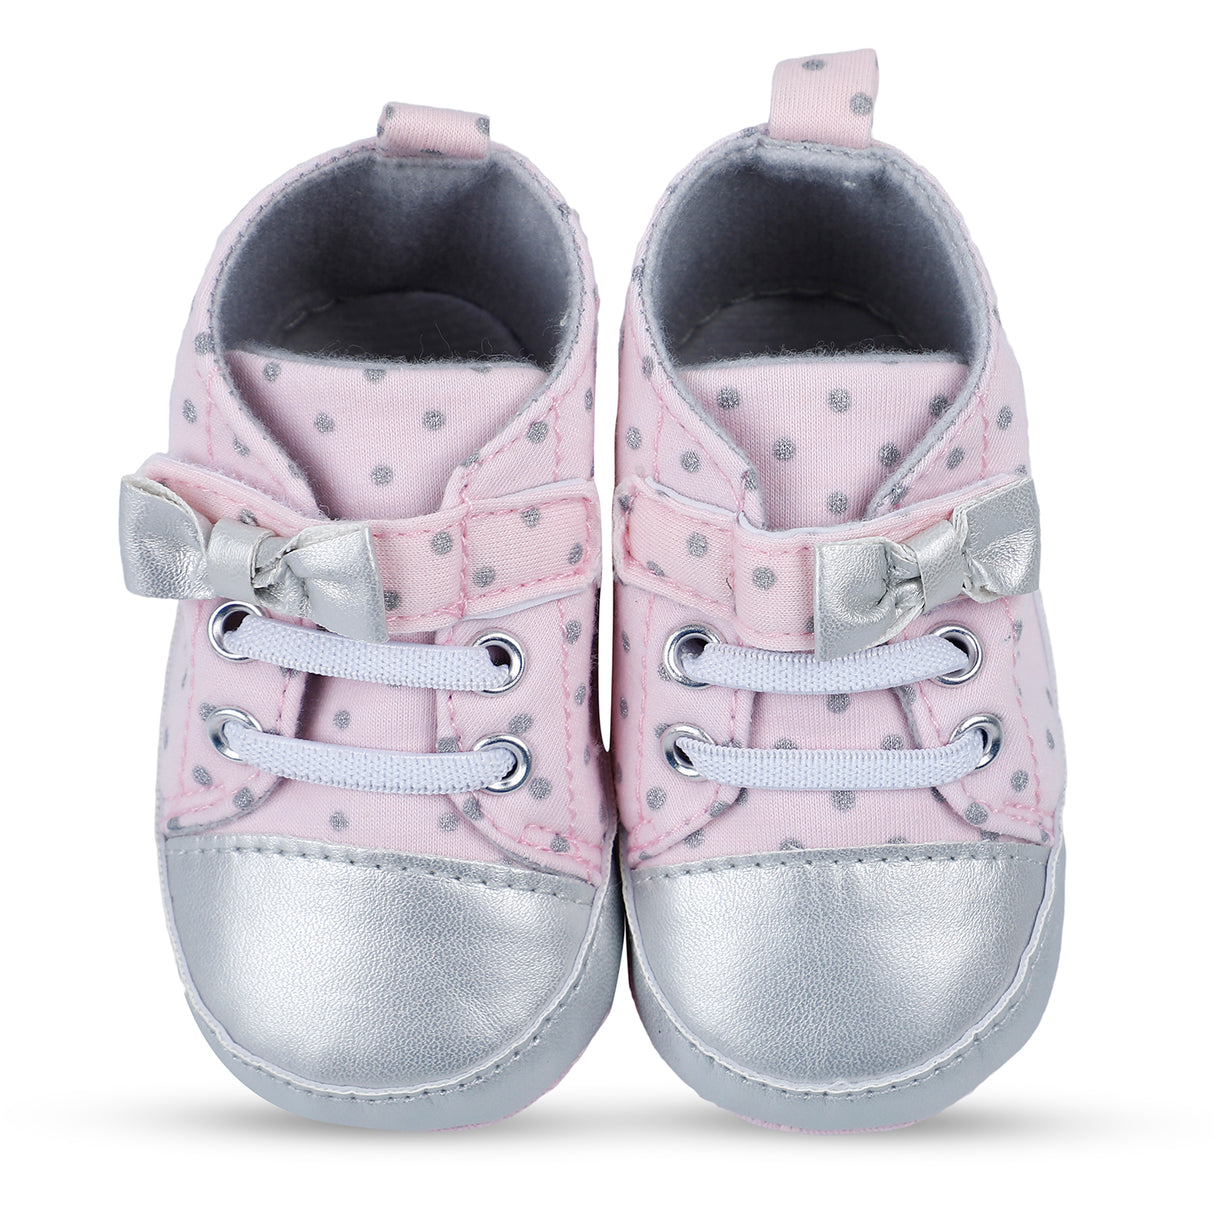 Dotted Lace Up Anti-Skid Sneakers